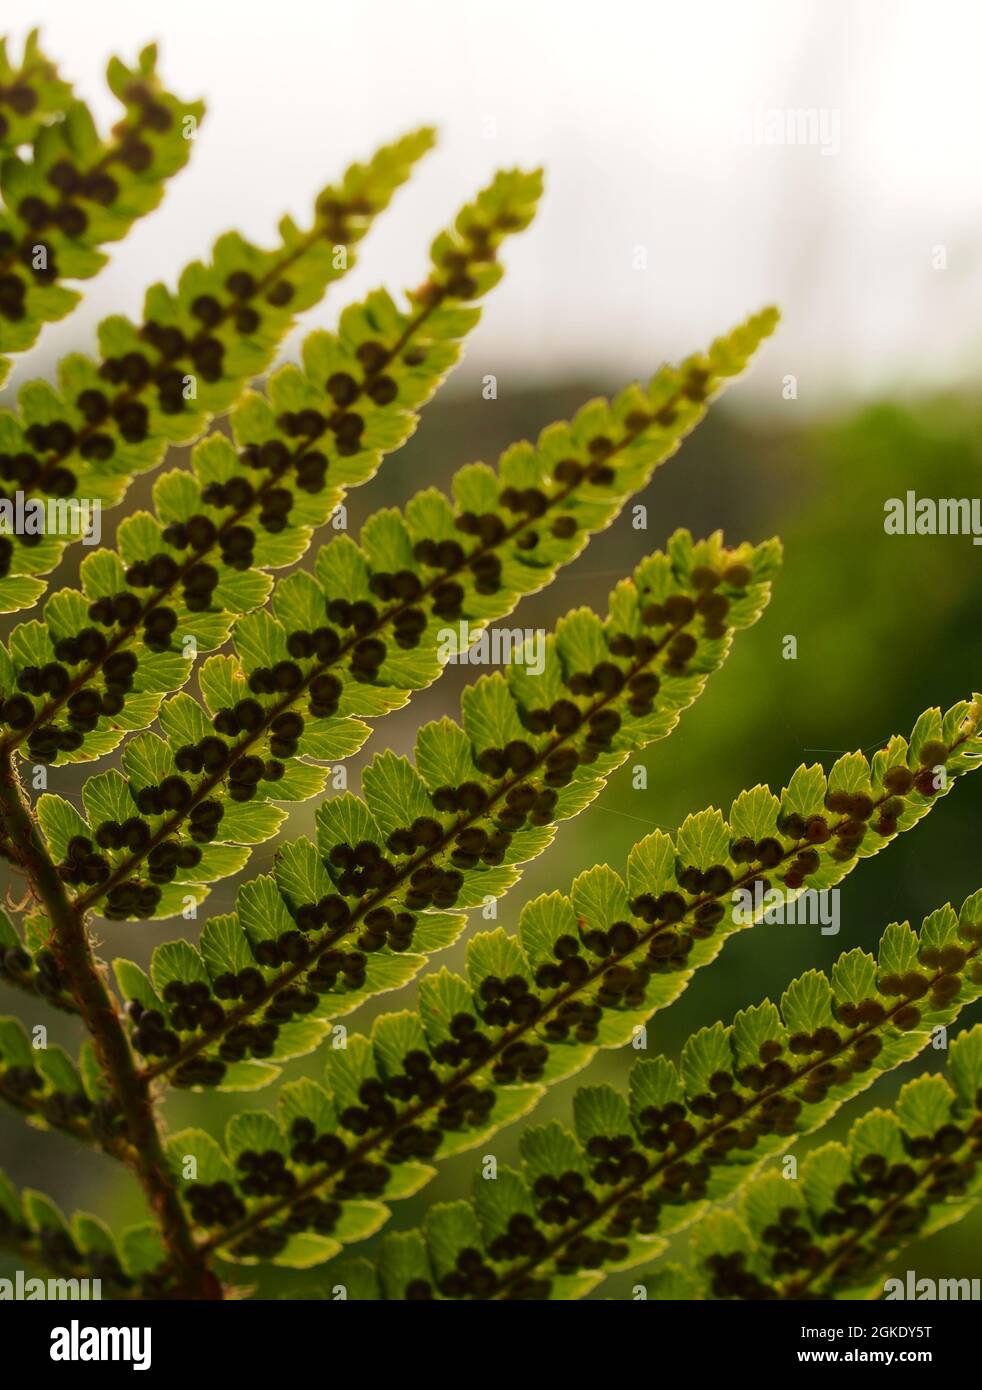 A view of bracken sprores on the underside of the fronds backlit against the sky Stock Photo